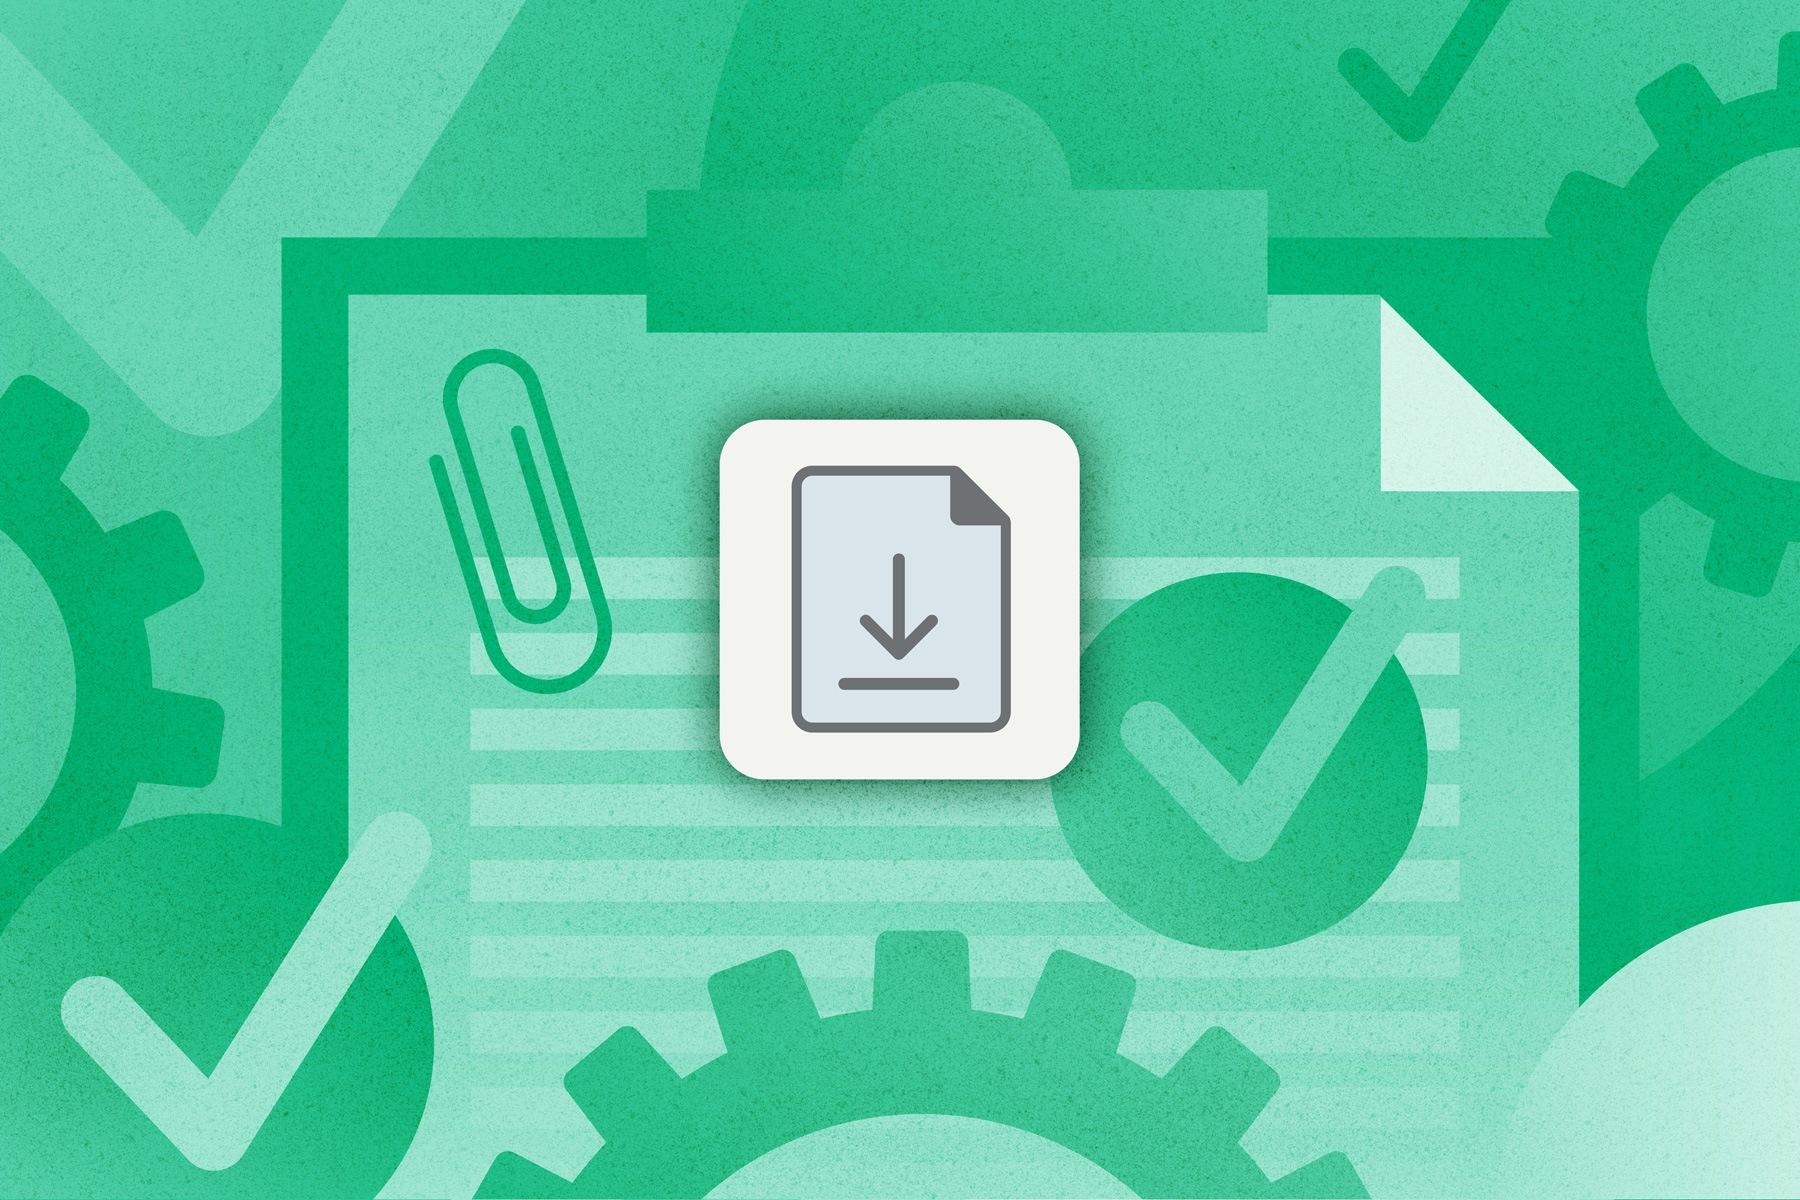 Illustrations of a clipboard, checkmarks and paperclips, shaded in green. A download icon hovers over the top.